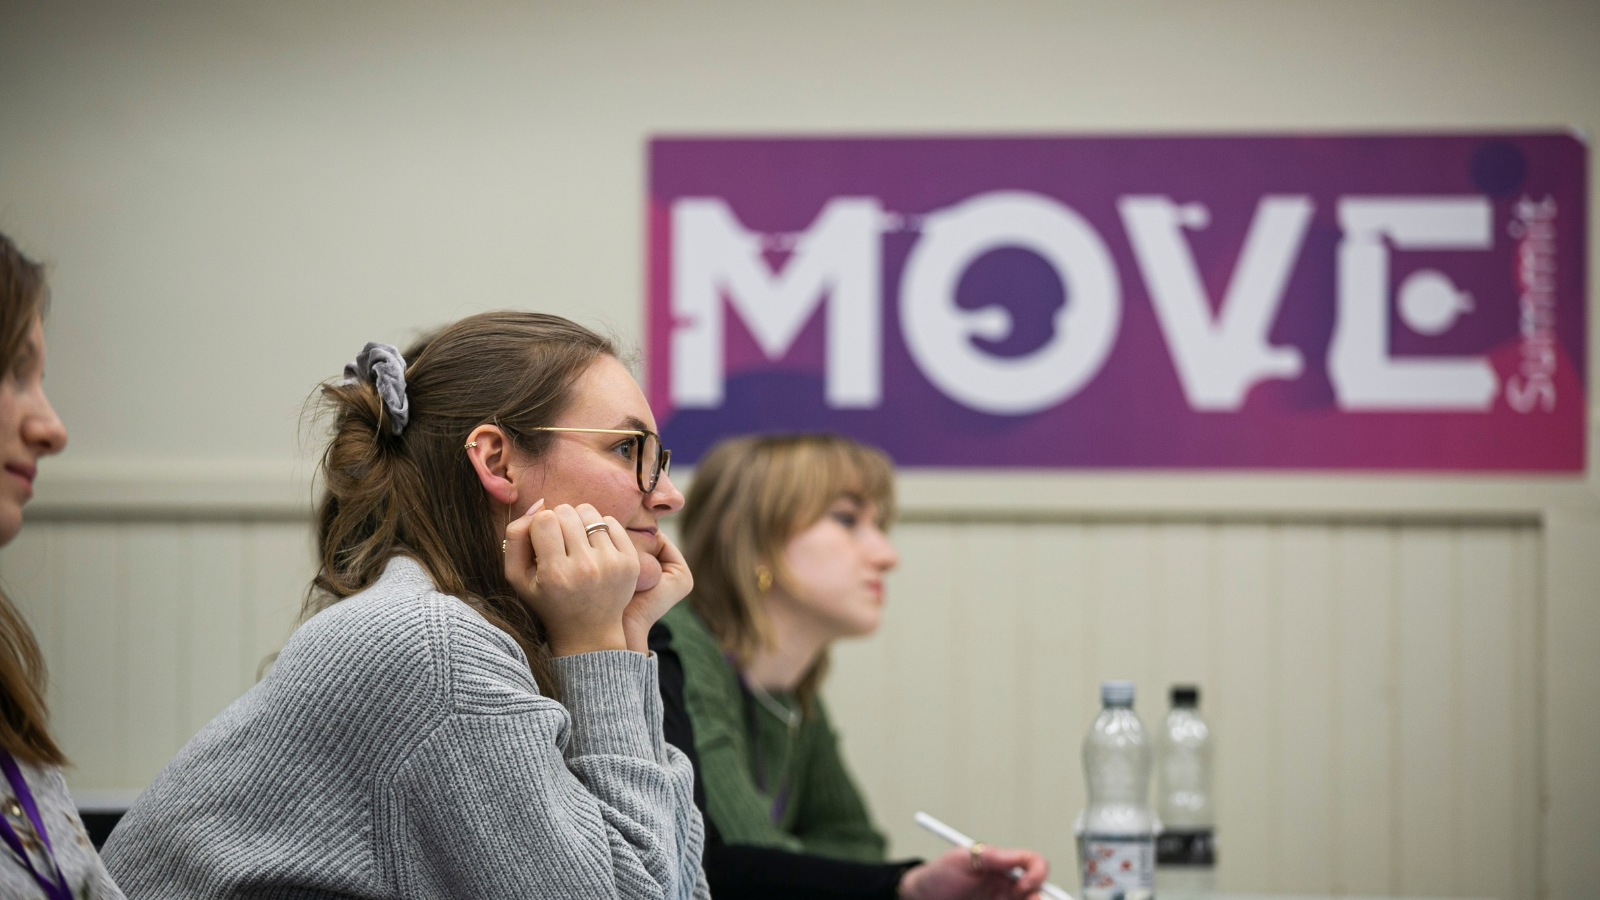 A woman wearing glasses and a light blue jumper sits facing to the right beside a sign that reads MOVE in capital letters